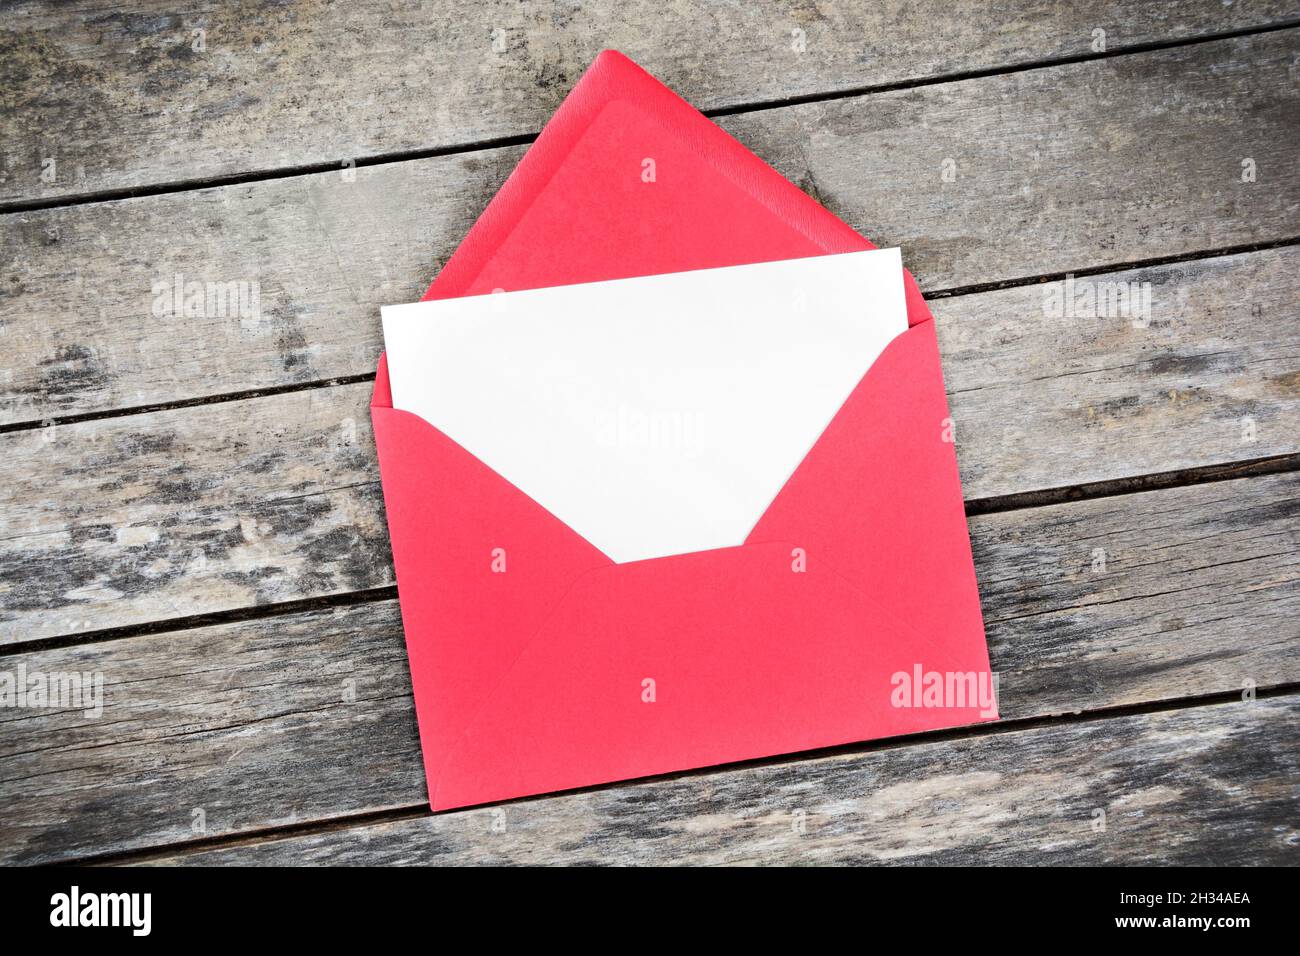 Blank white paper is placed on the open red paper envelope. Top view Stock Photo